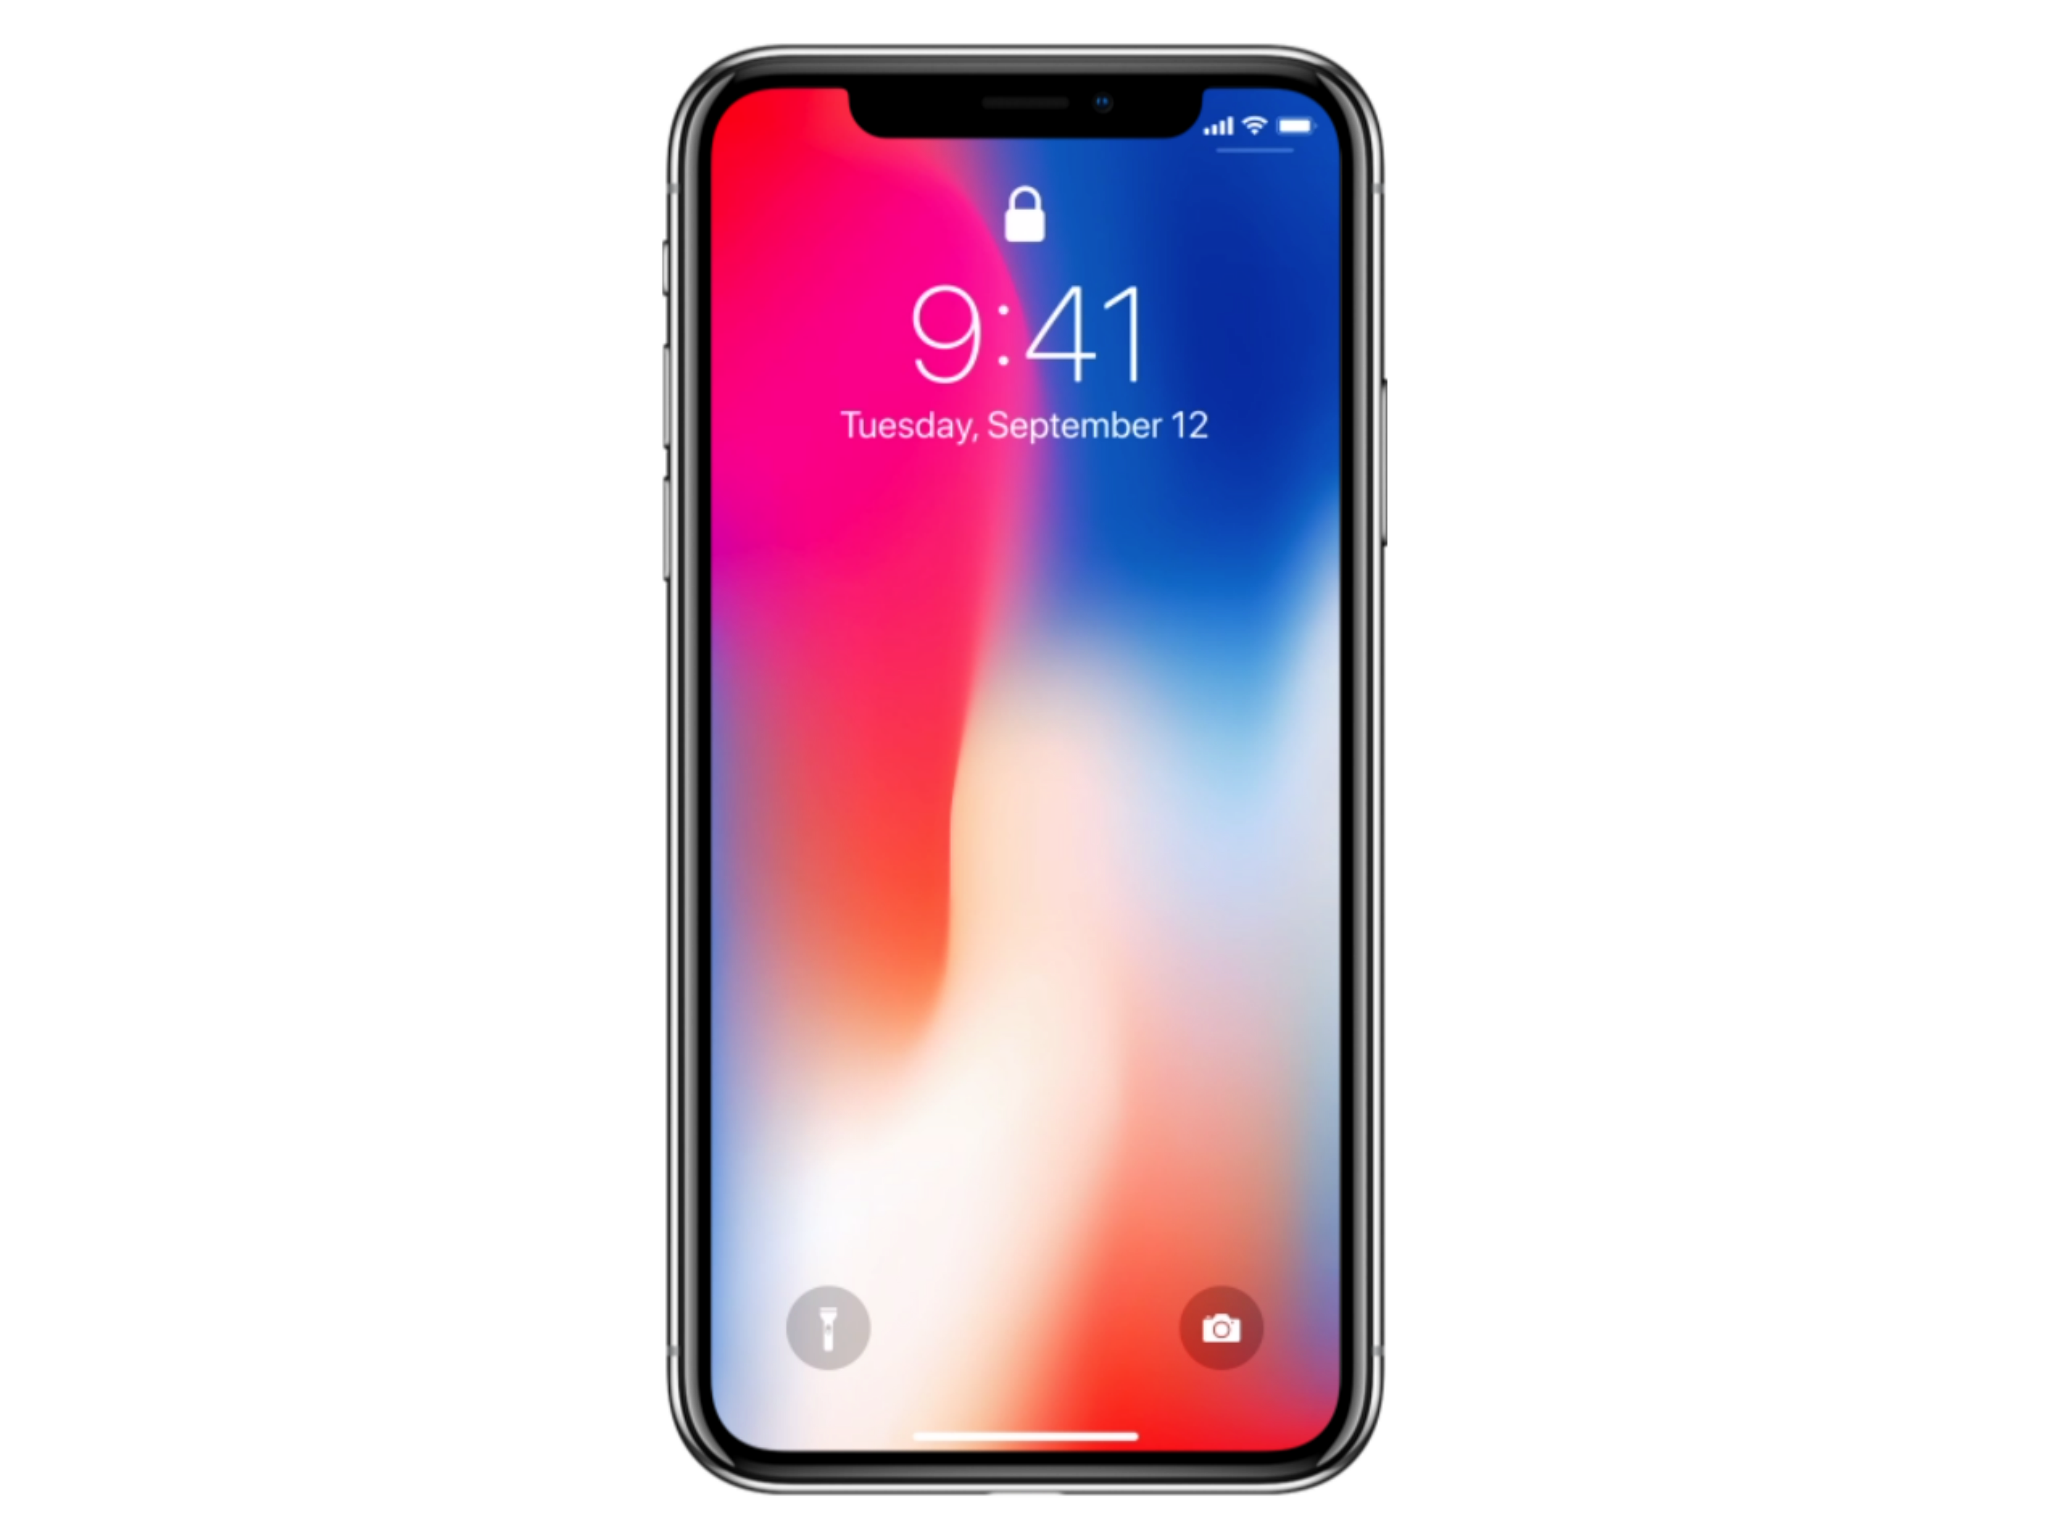 Iphone X Features A Leap Forward For Apple But Samsung Is Still - iphone x features a leap forward for apple but samsung is still ahead the independent